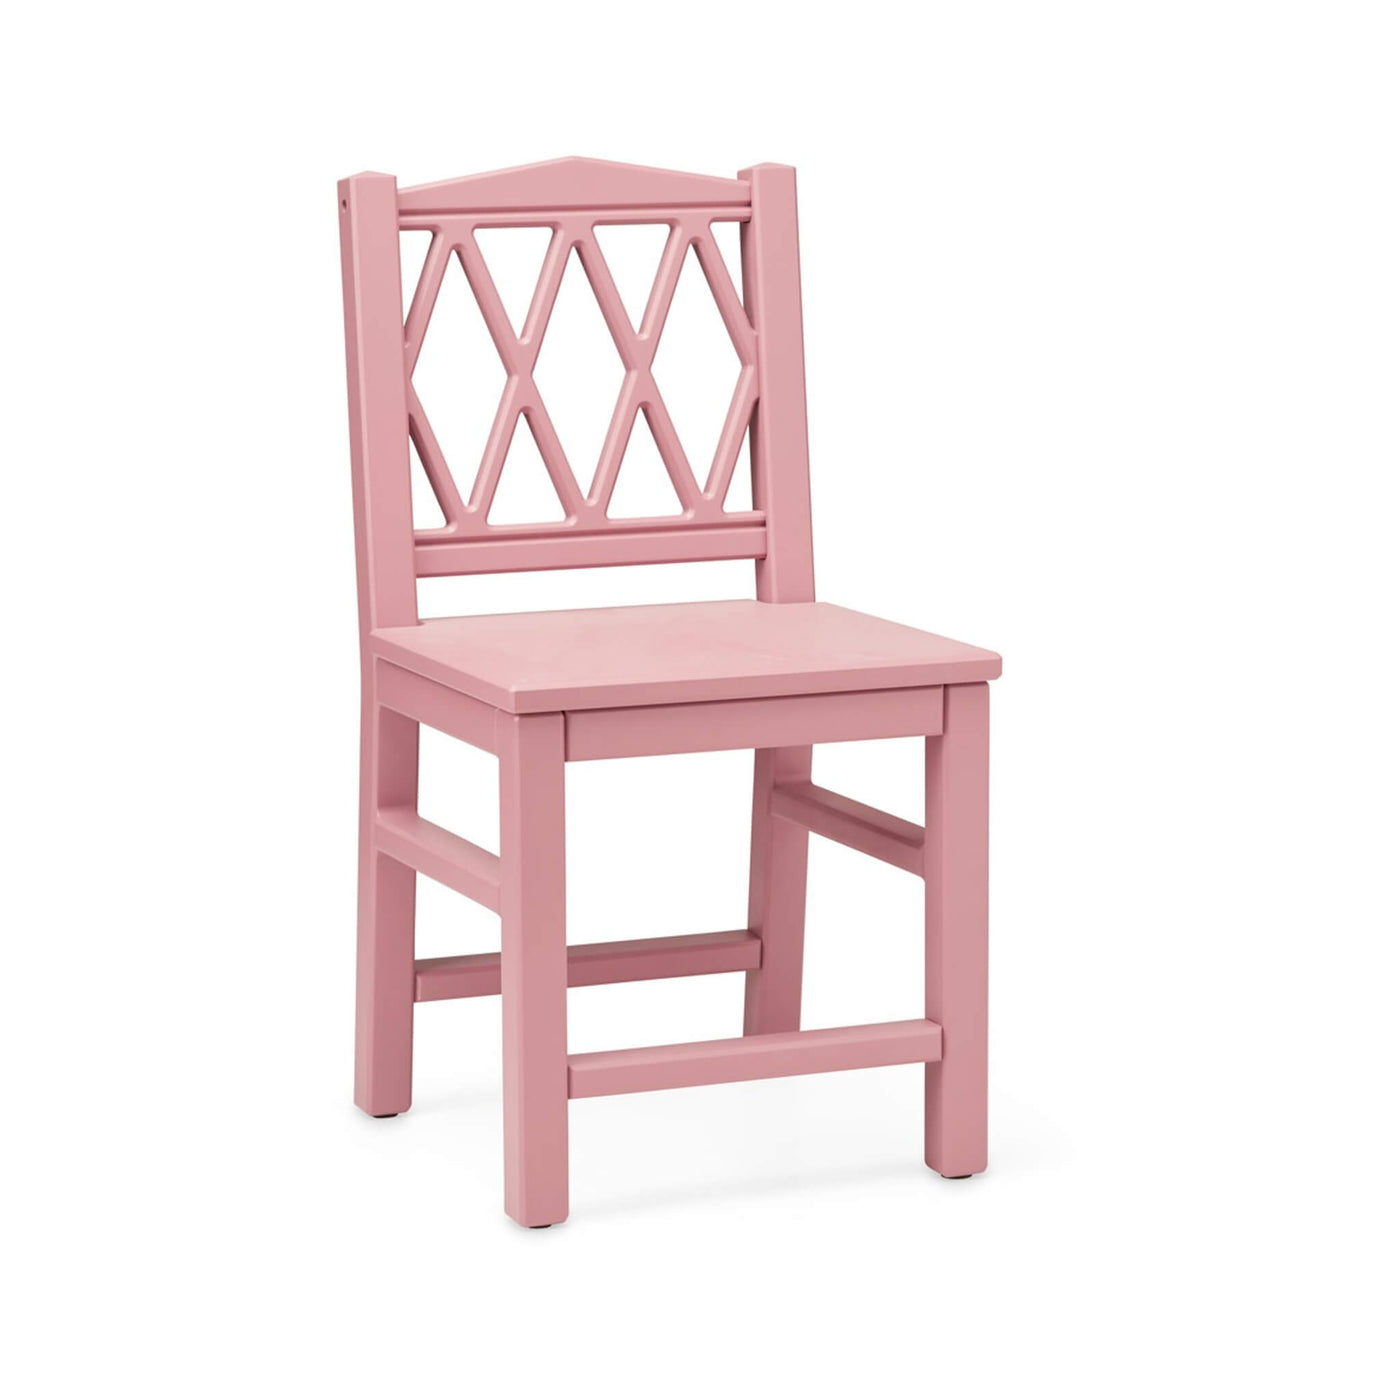 Harlequin Chair - Berry